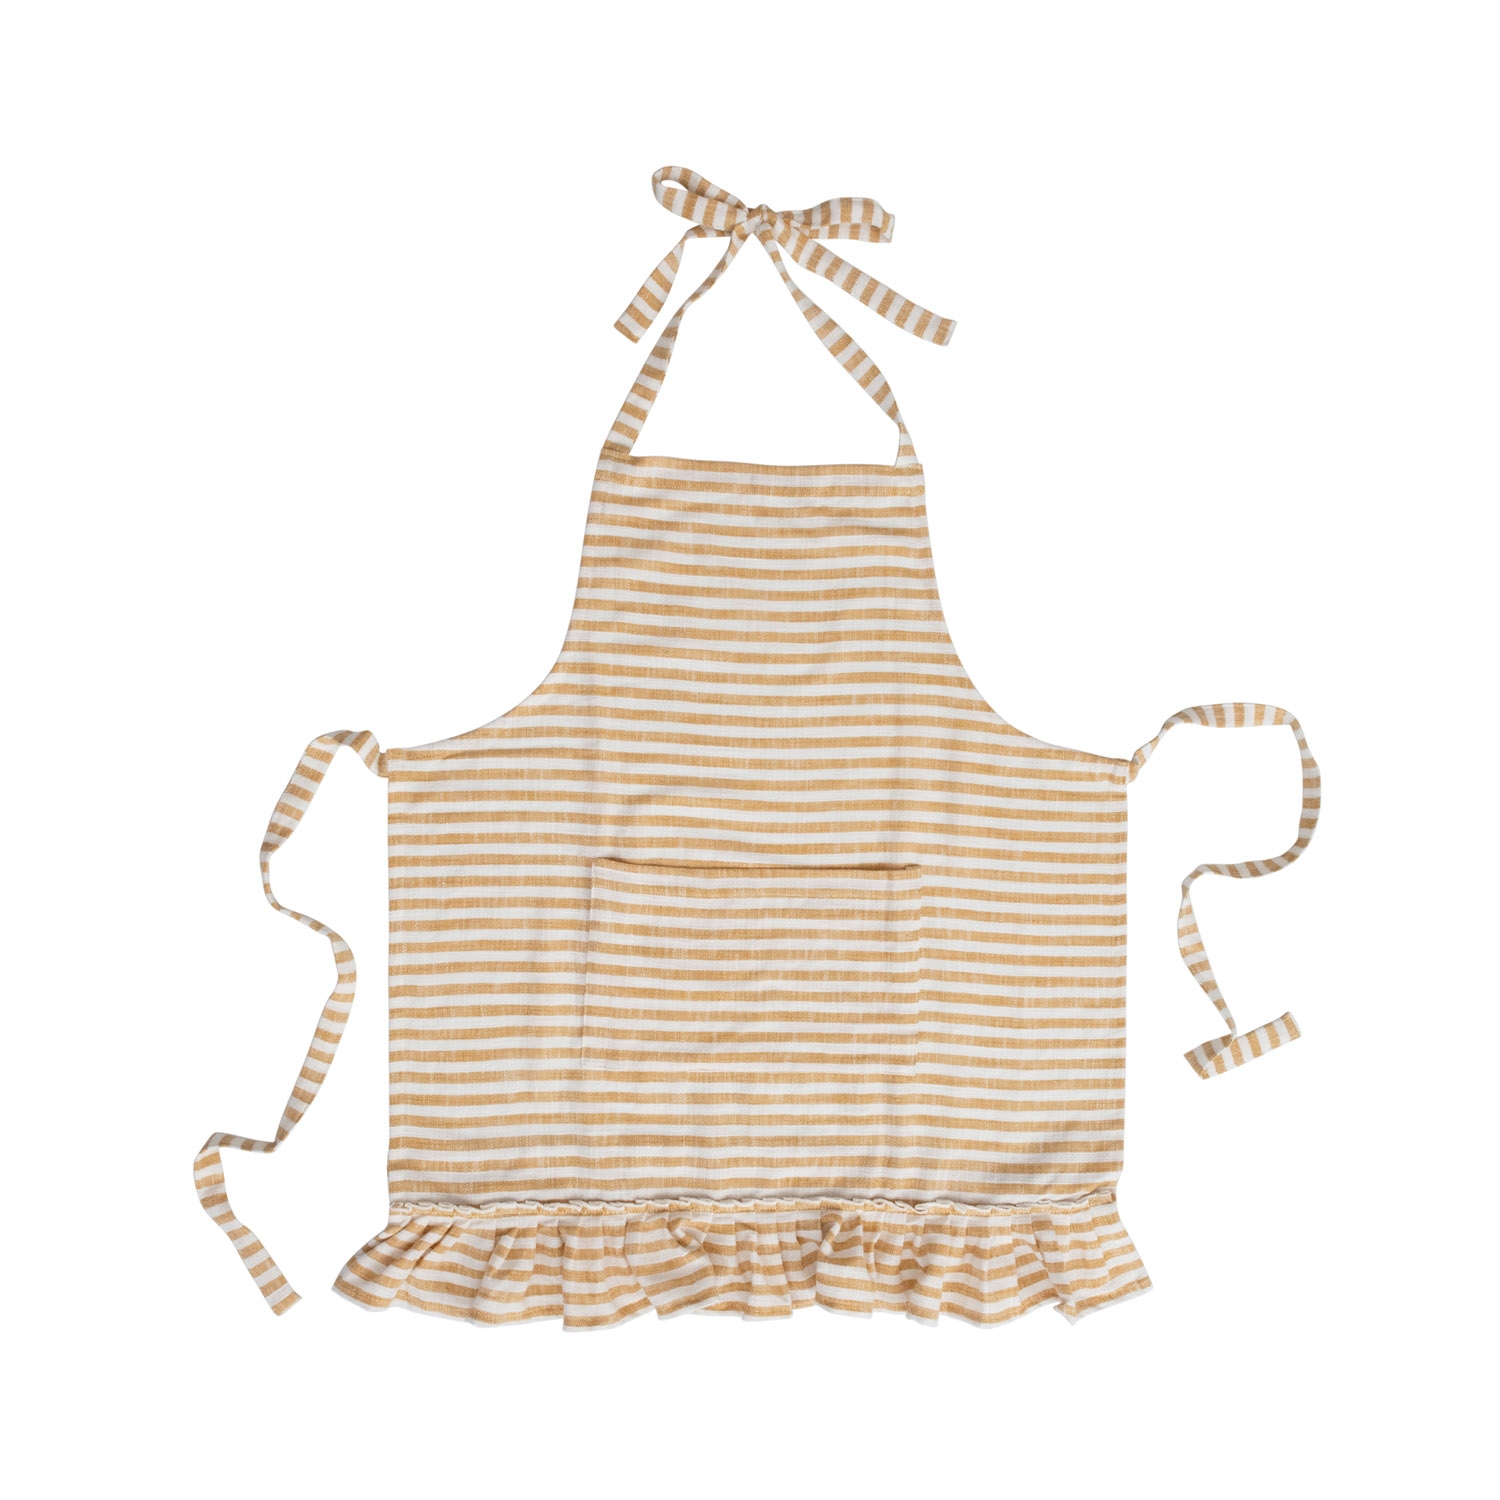 Woven Cotton Striped Apron with Ruffle - Image 0